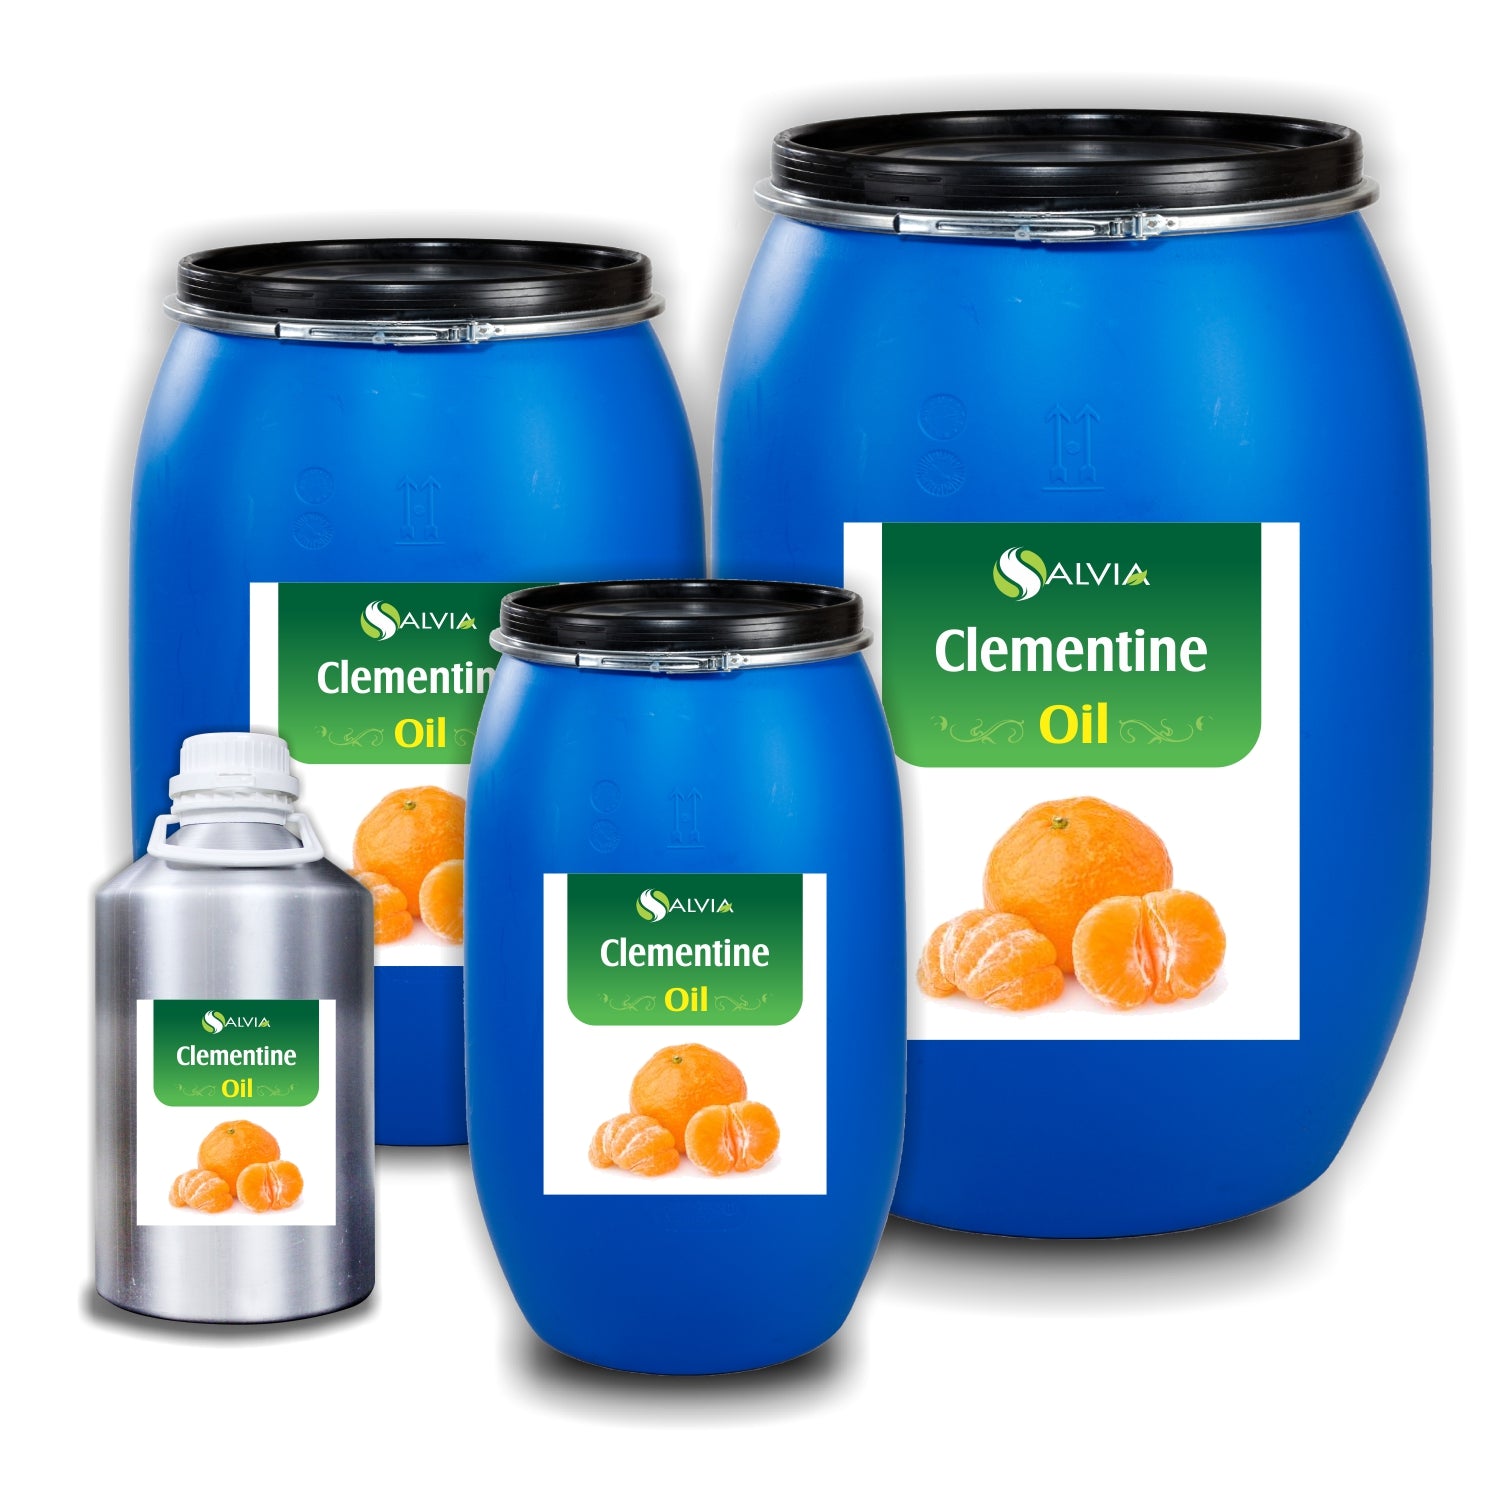 Salvia Natural Essential Oils 10kg Clementine Oil (Citrus-Clementine) 100% Natural Pure Essential Oil Brightens Skin, Elevates Positive Emotions, Purifies Air, Aromatherapy